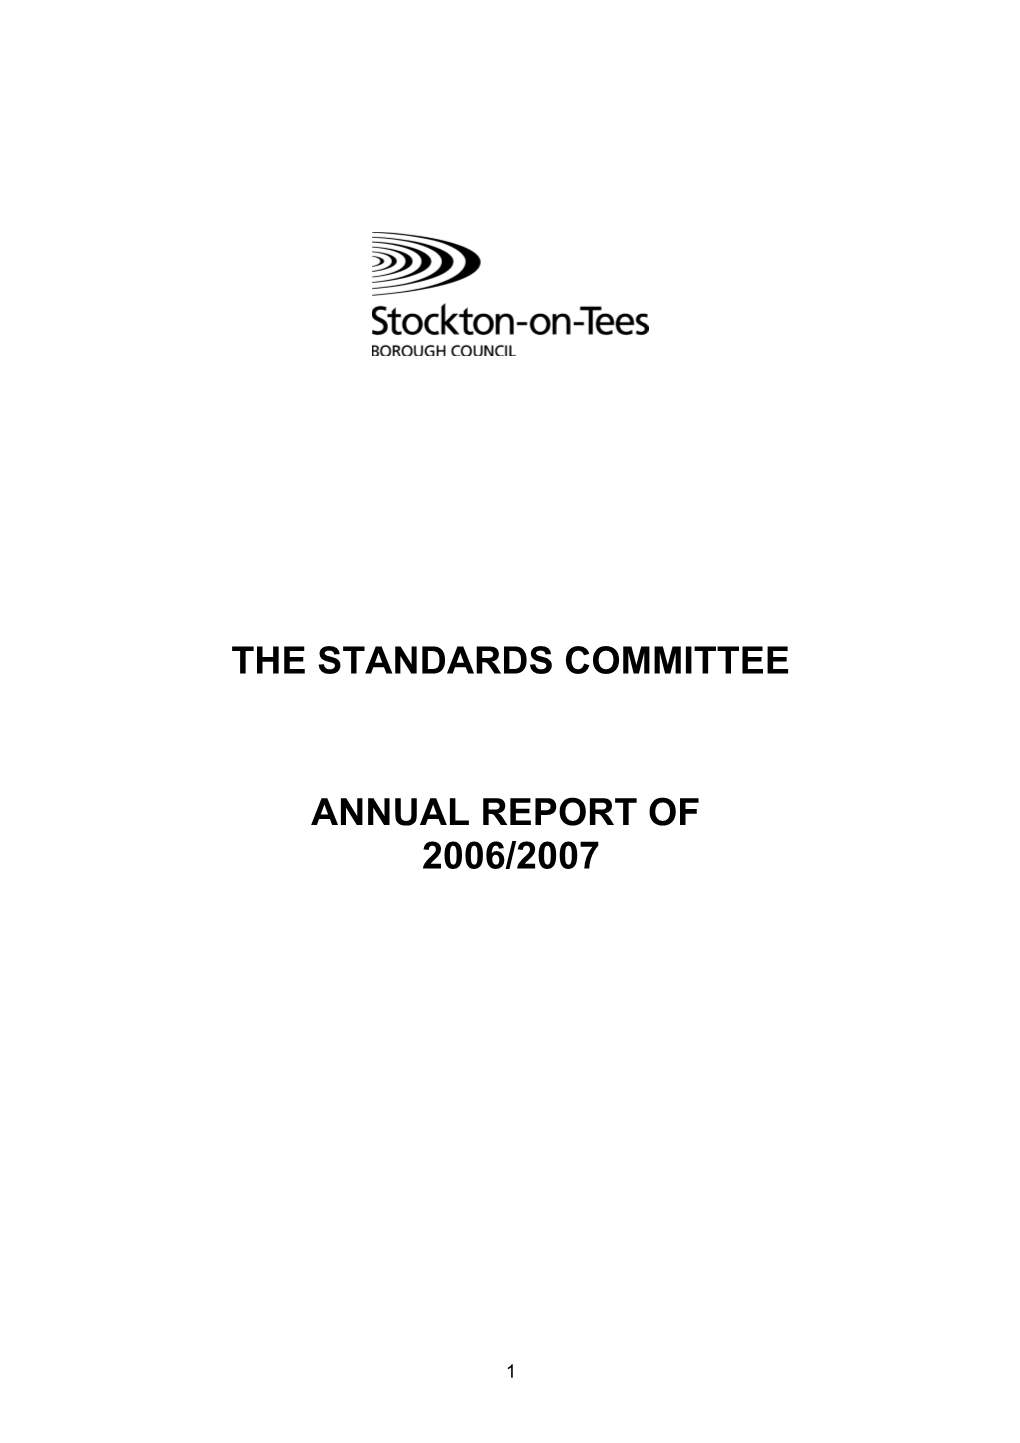 The Standards Committee